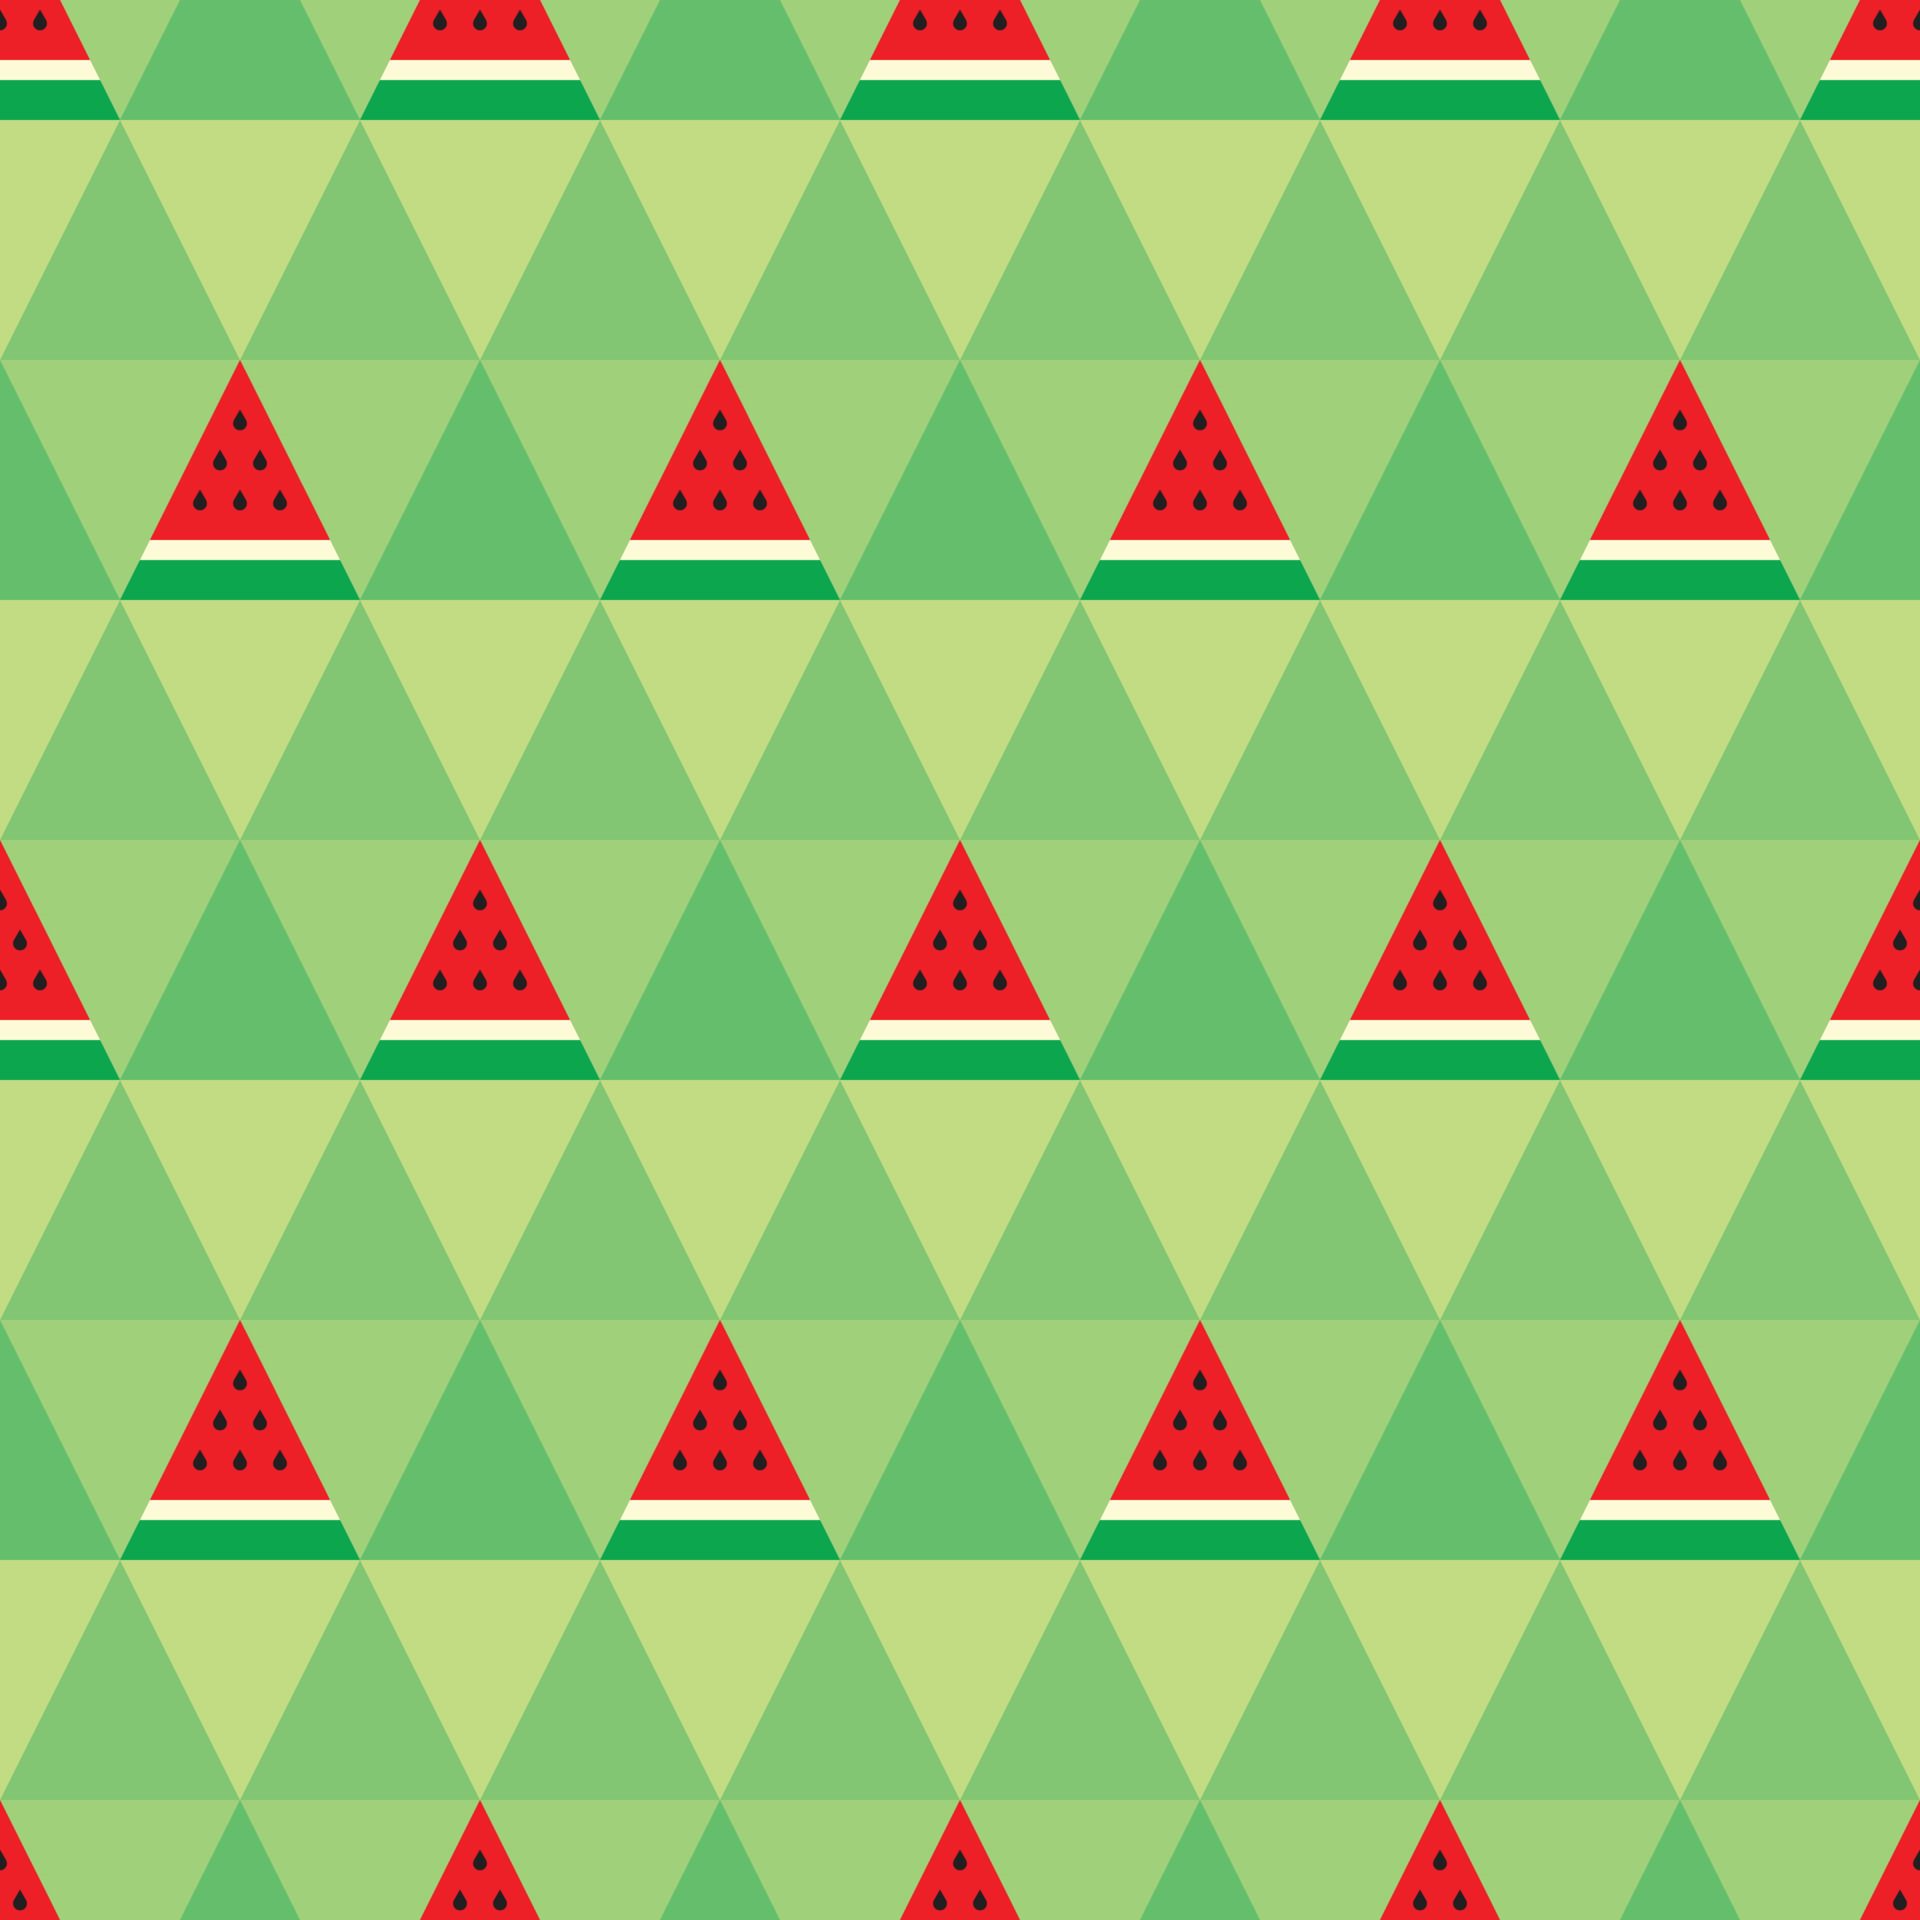 Red watermelon themed background. Geometric seamless triangle fruit pattern motif. Simple flat vector illustration. Watermelon in triangular slices. For backdrops, covers, prints, and wallpaper